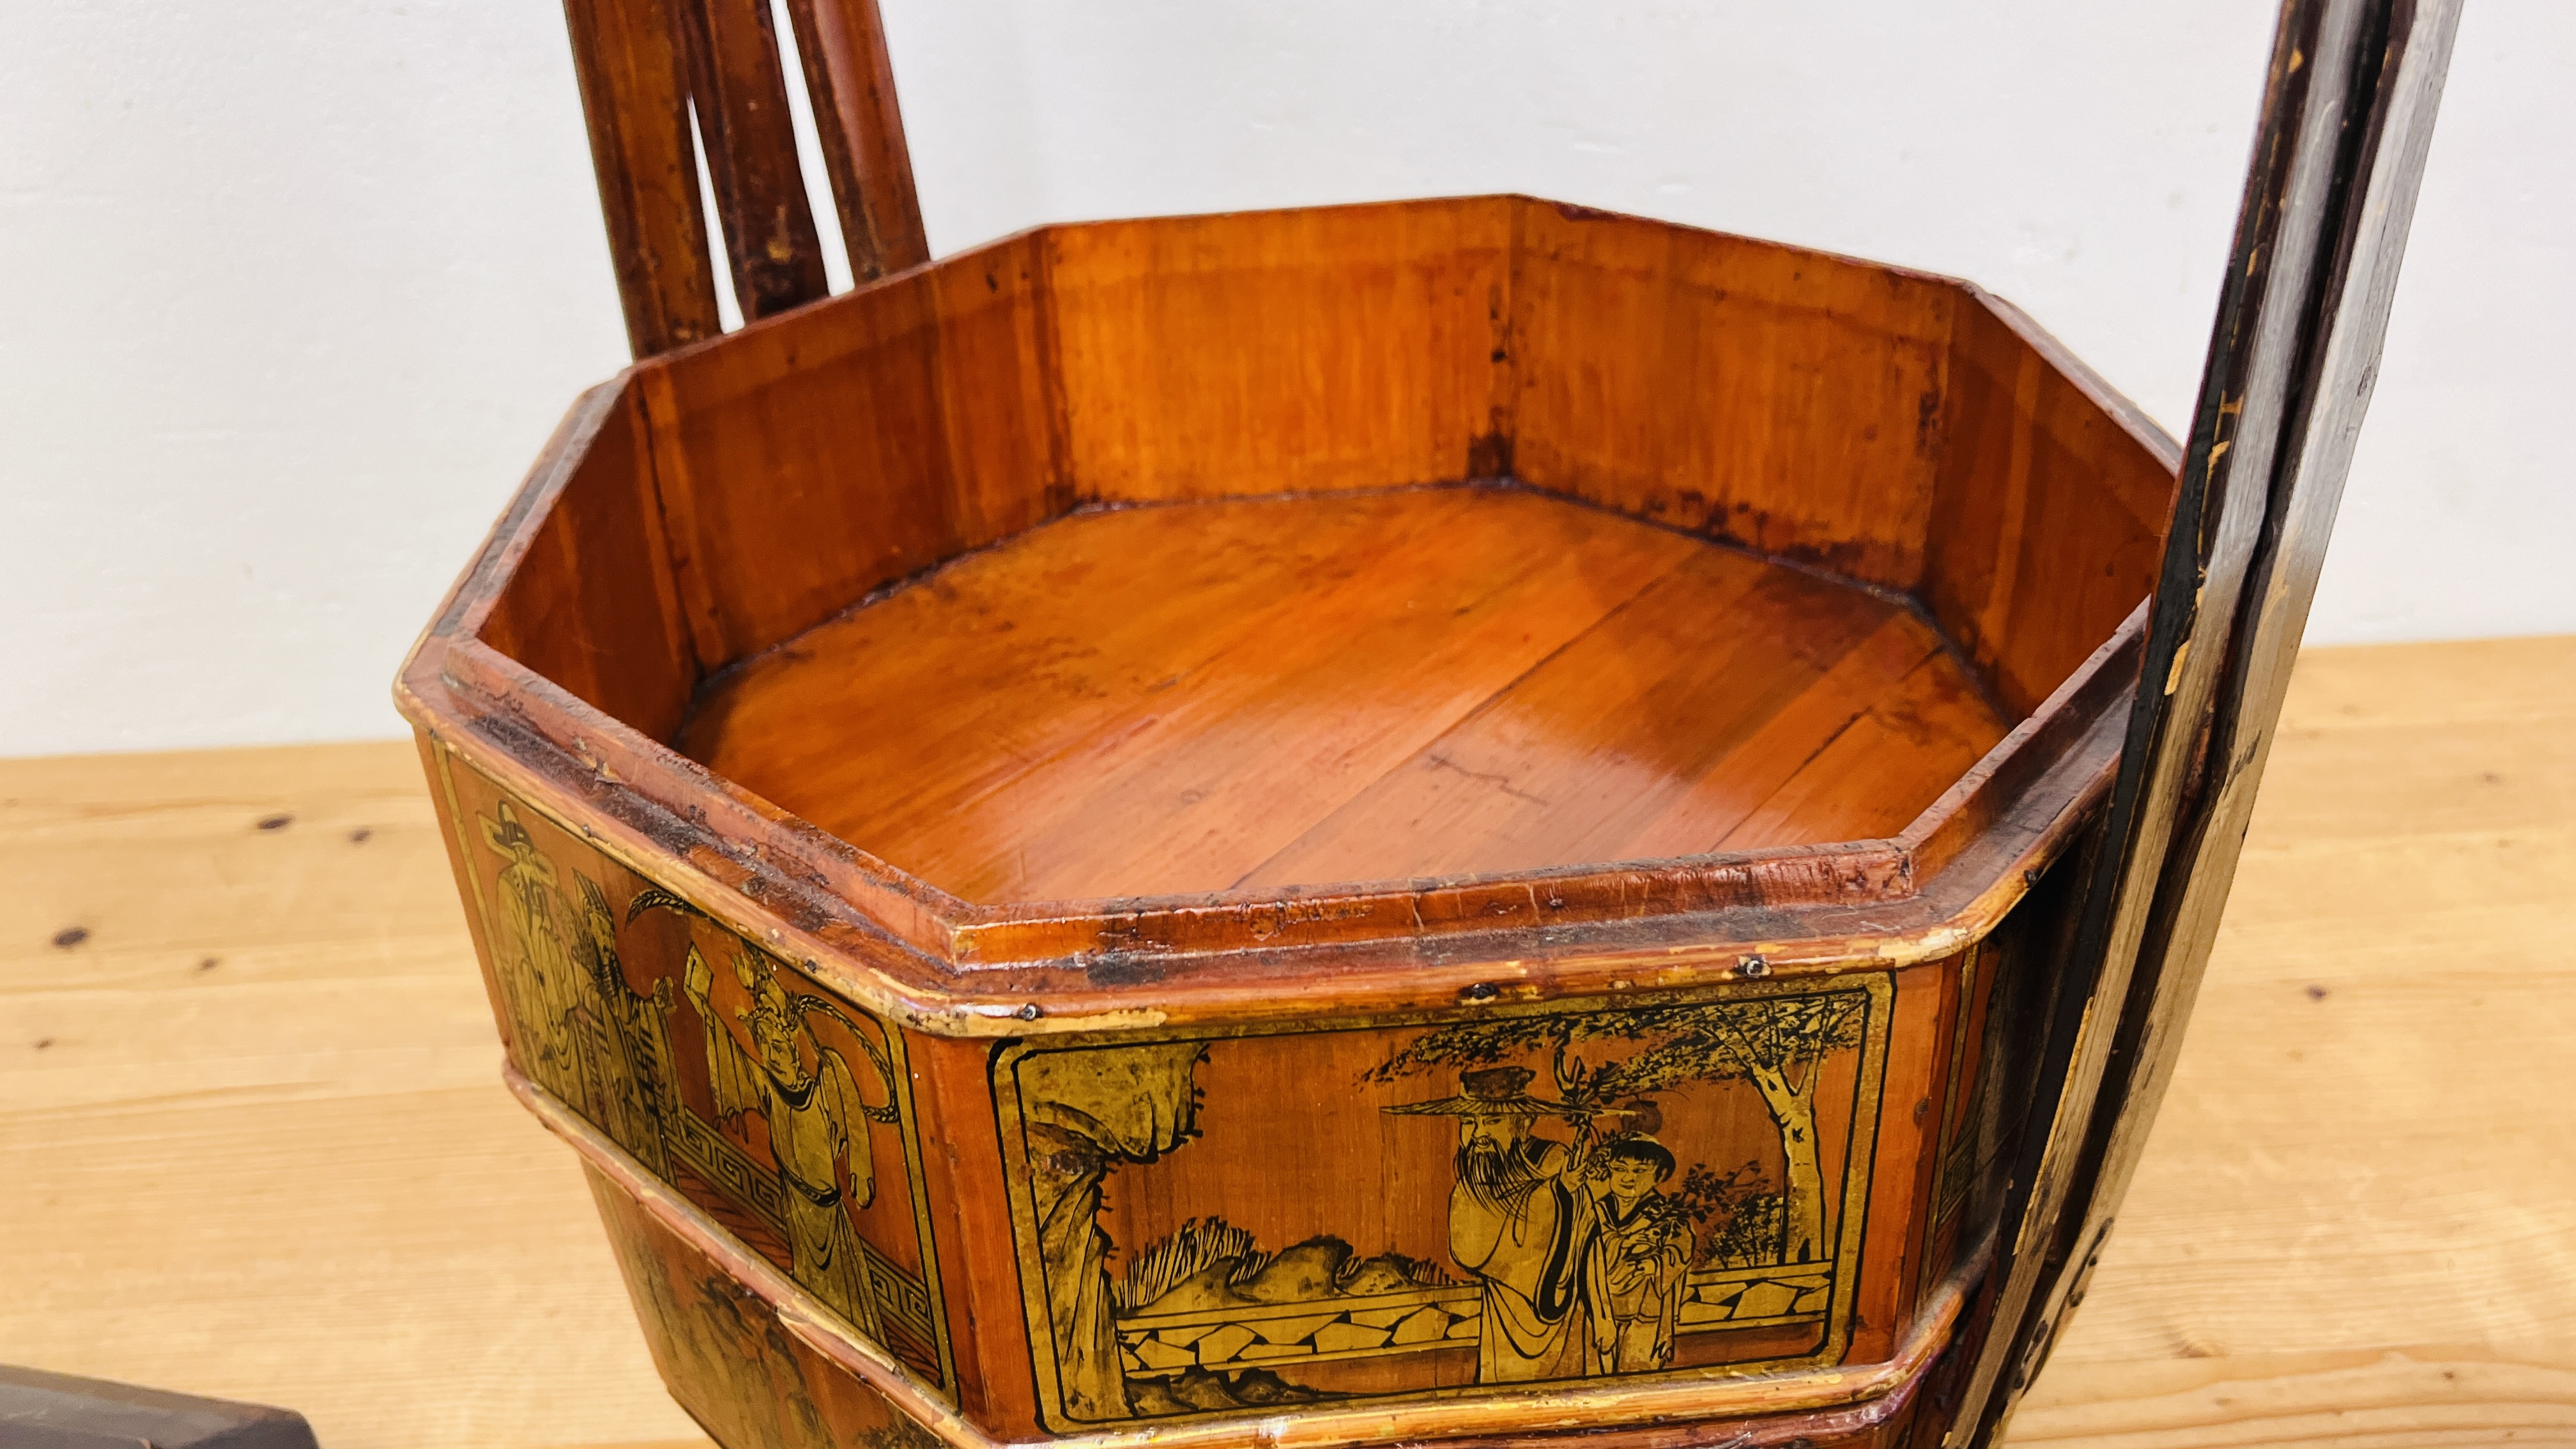 A HIGHLY DECORATIVE GILT DECORATED AND LACQUERED CHINESE WEDDING BASKET - HEIGHT 62CM. - Image 11 of 12